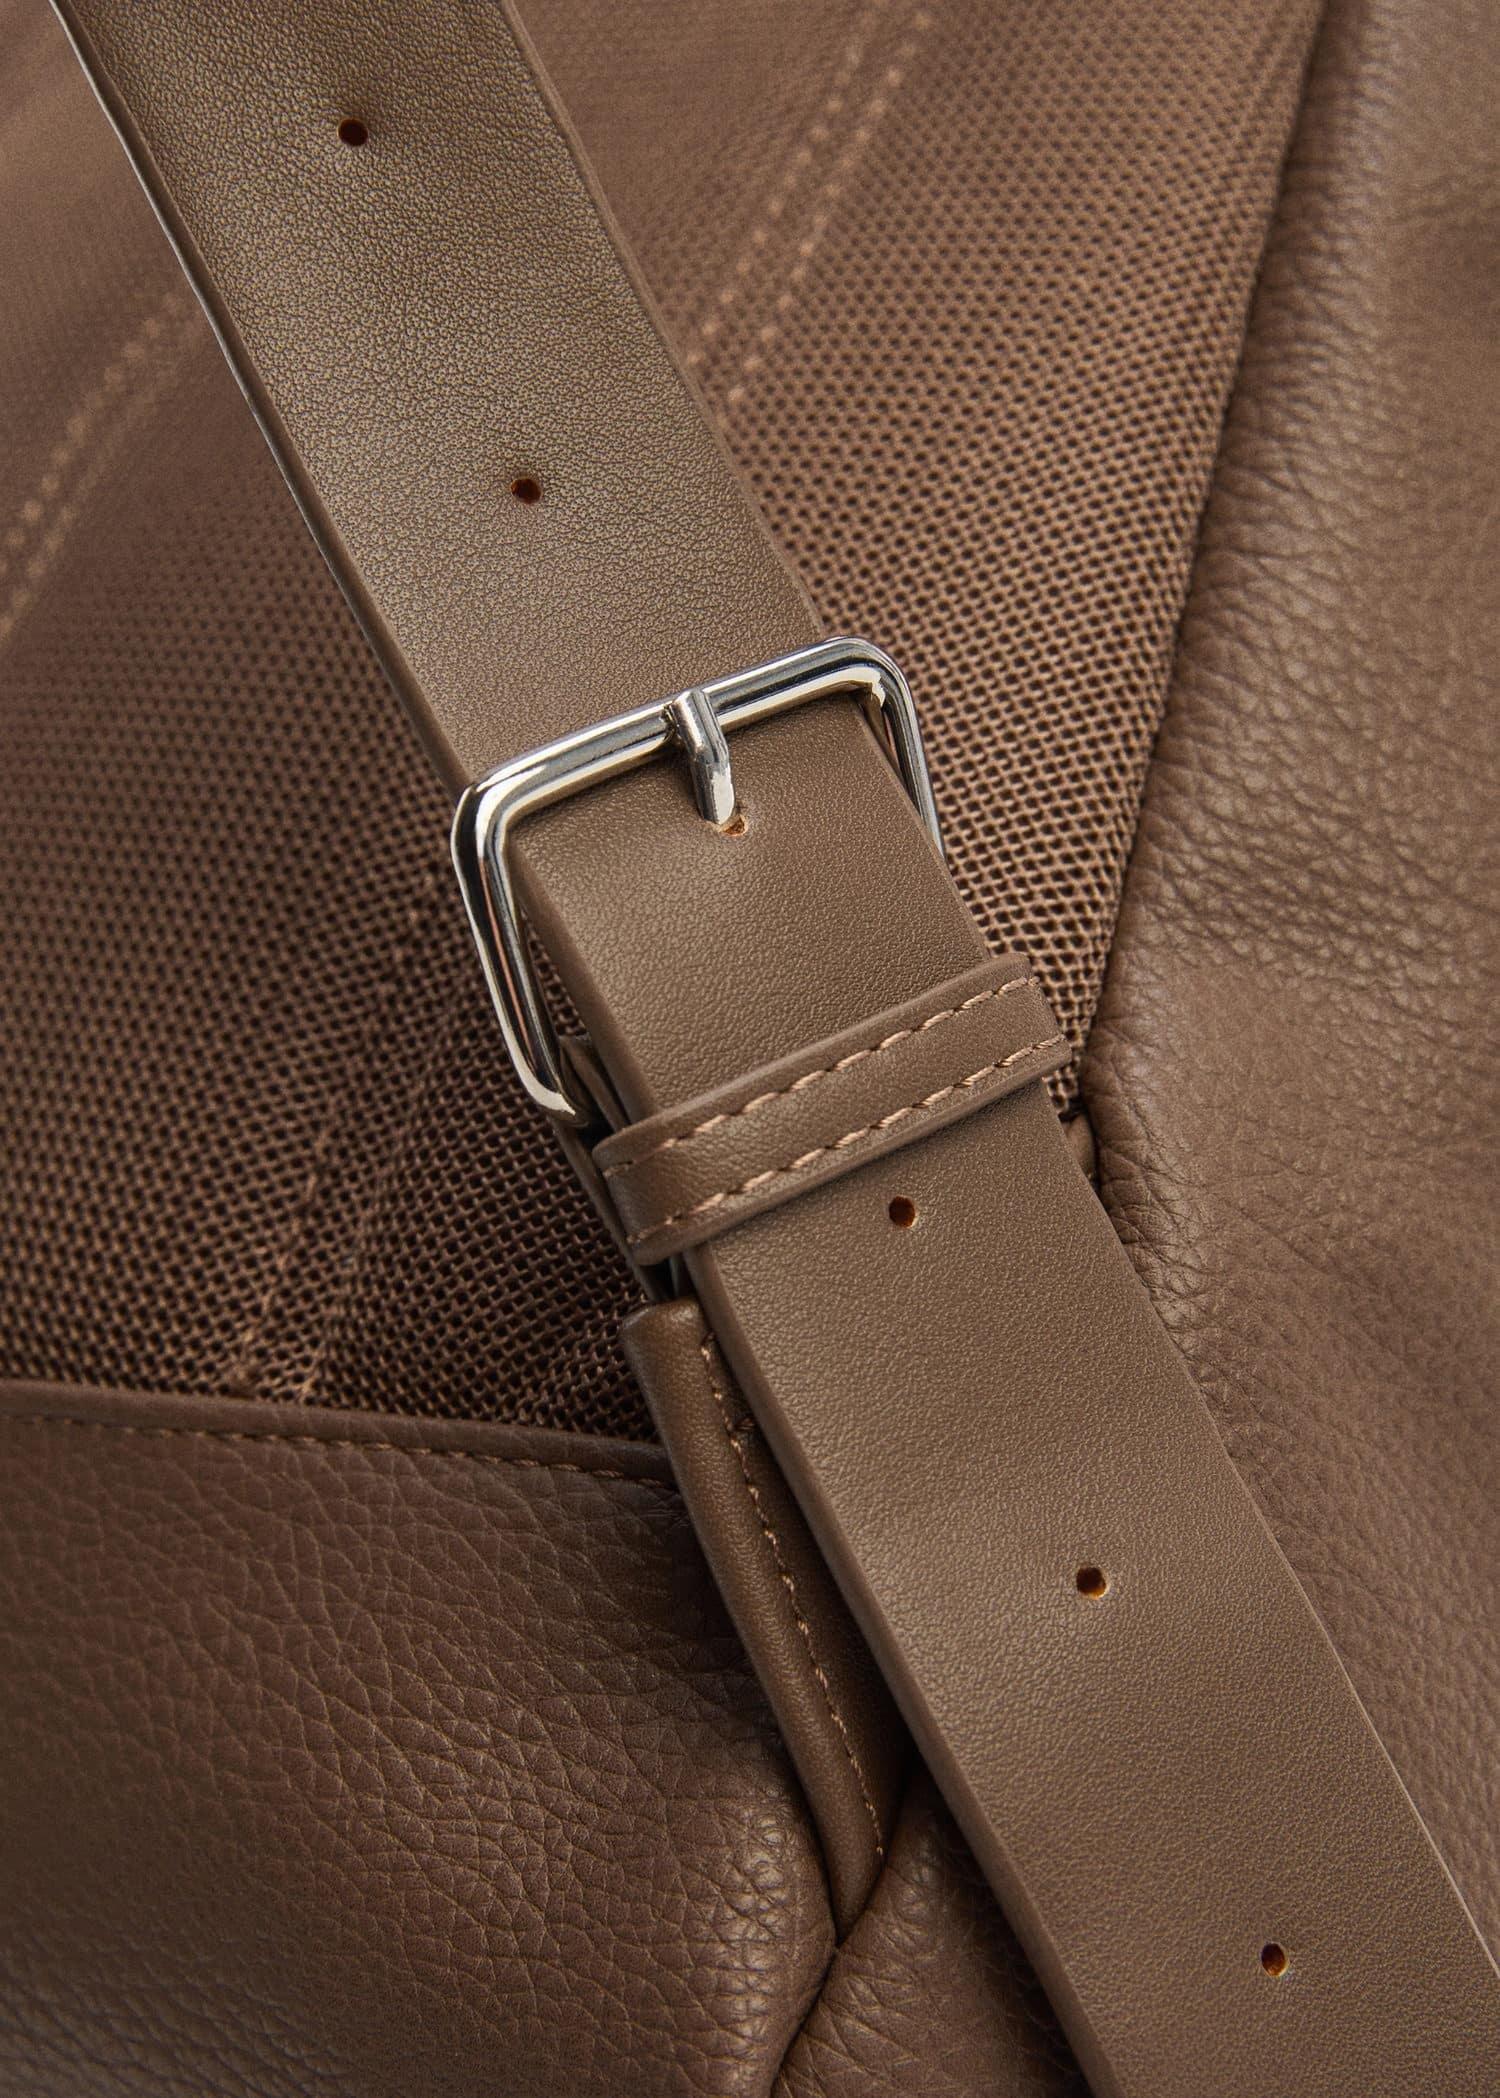 Mango - Brown Leather-Effect Backpack